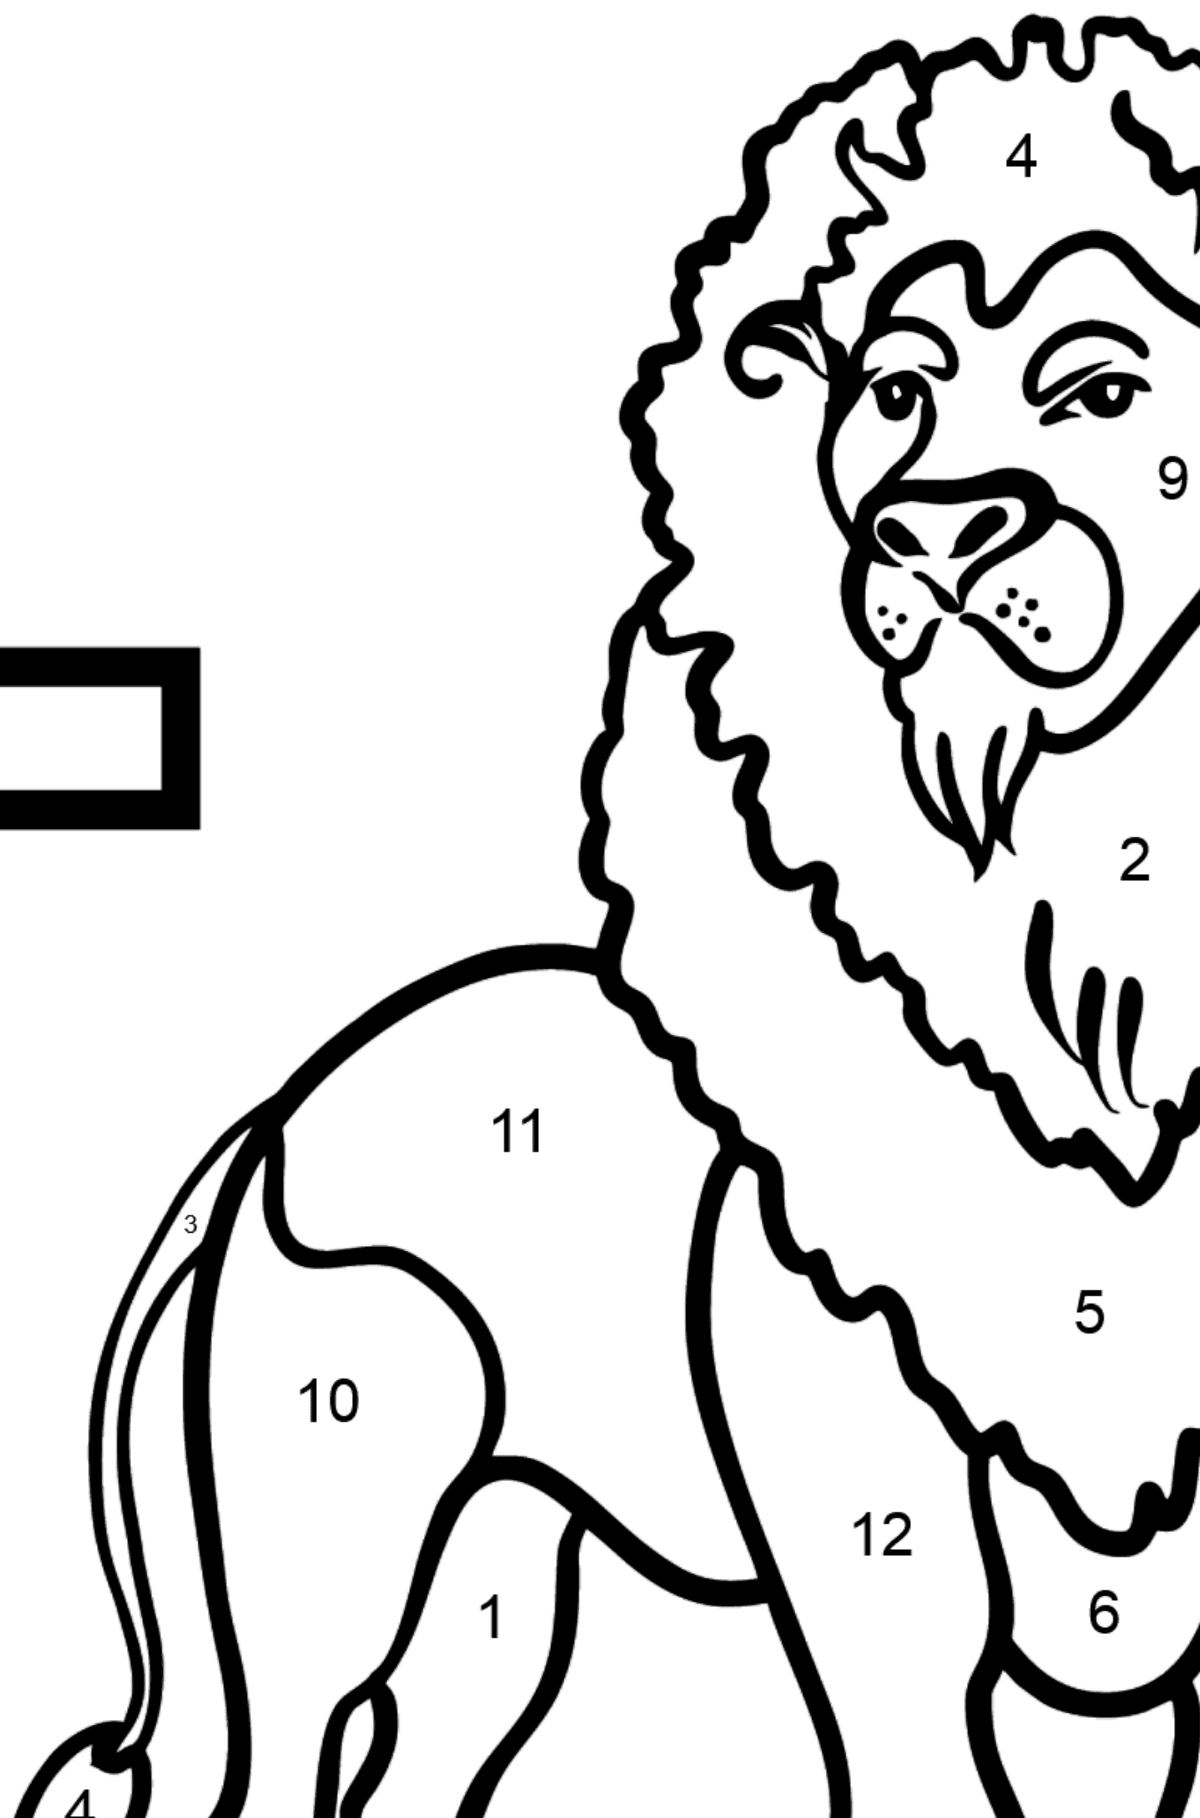 Spanish Letter L coloring pages - LEON - Coloring by Numbers for Kids